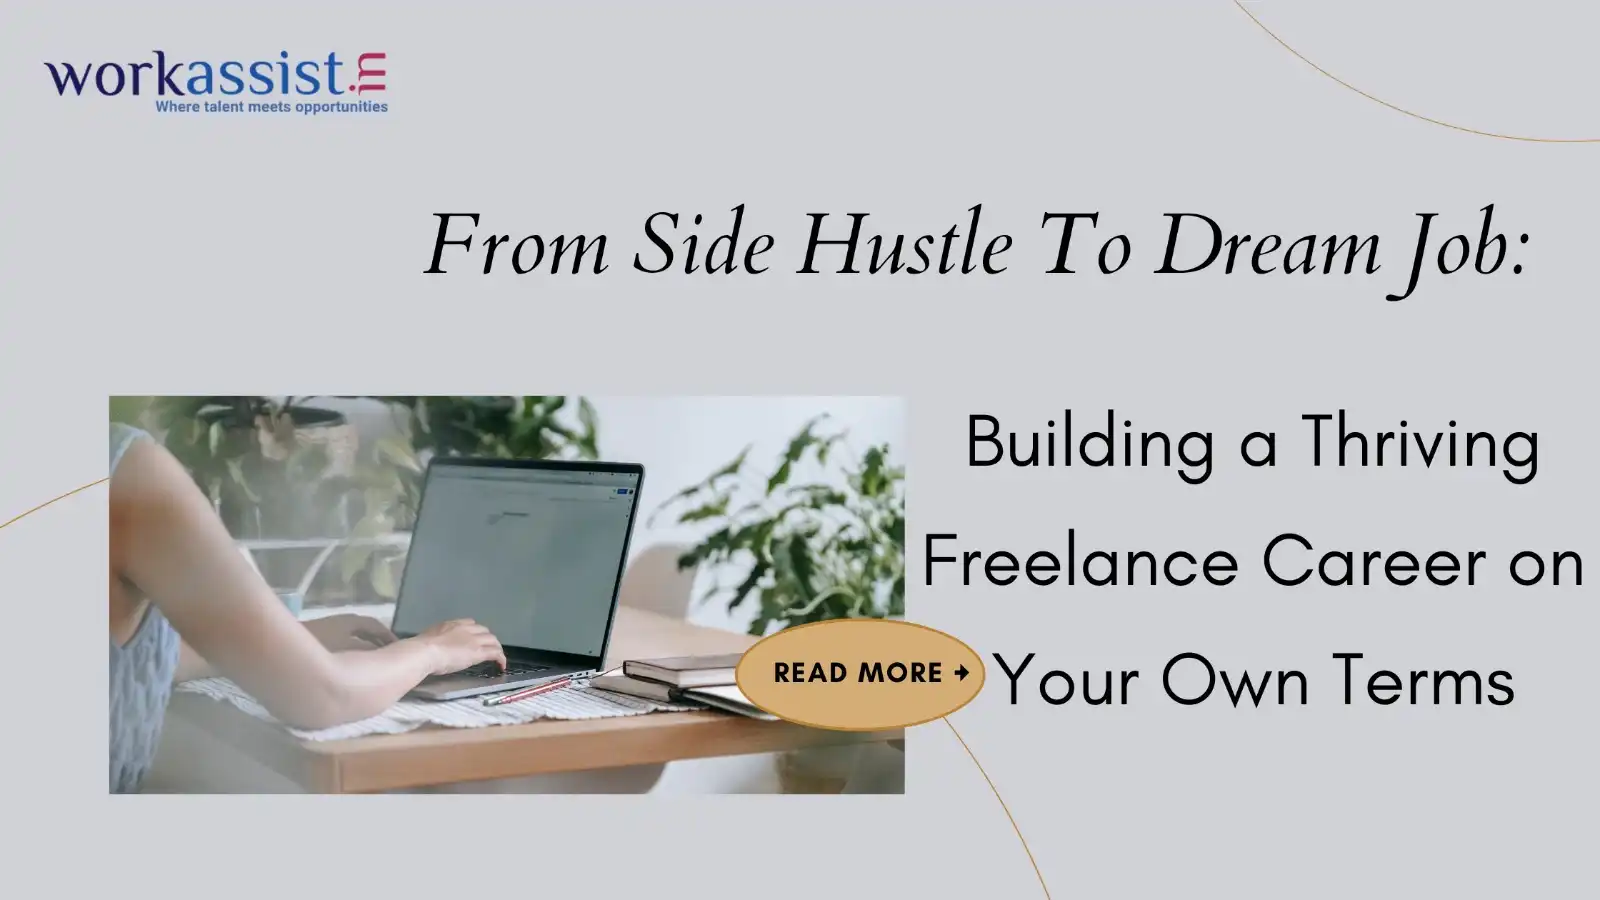 From Side Hustle To Dream Job: Building a Thriving Freelance Career on Your Own Terms